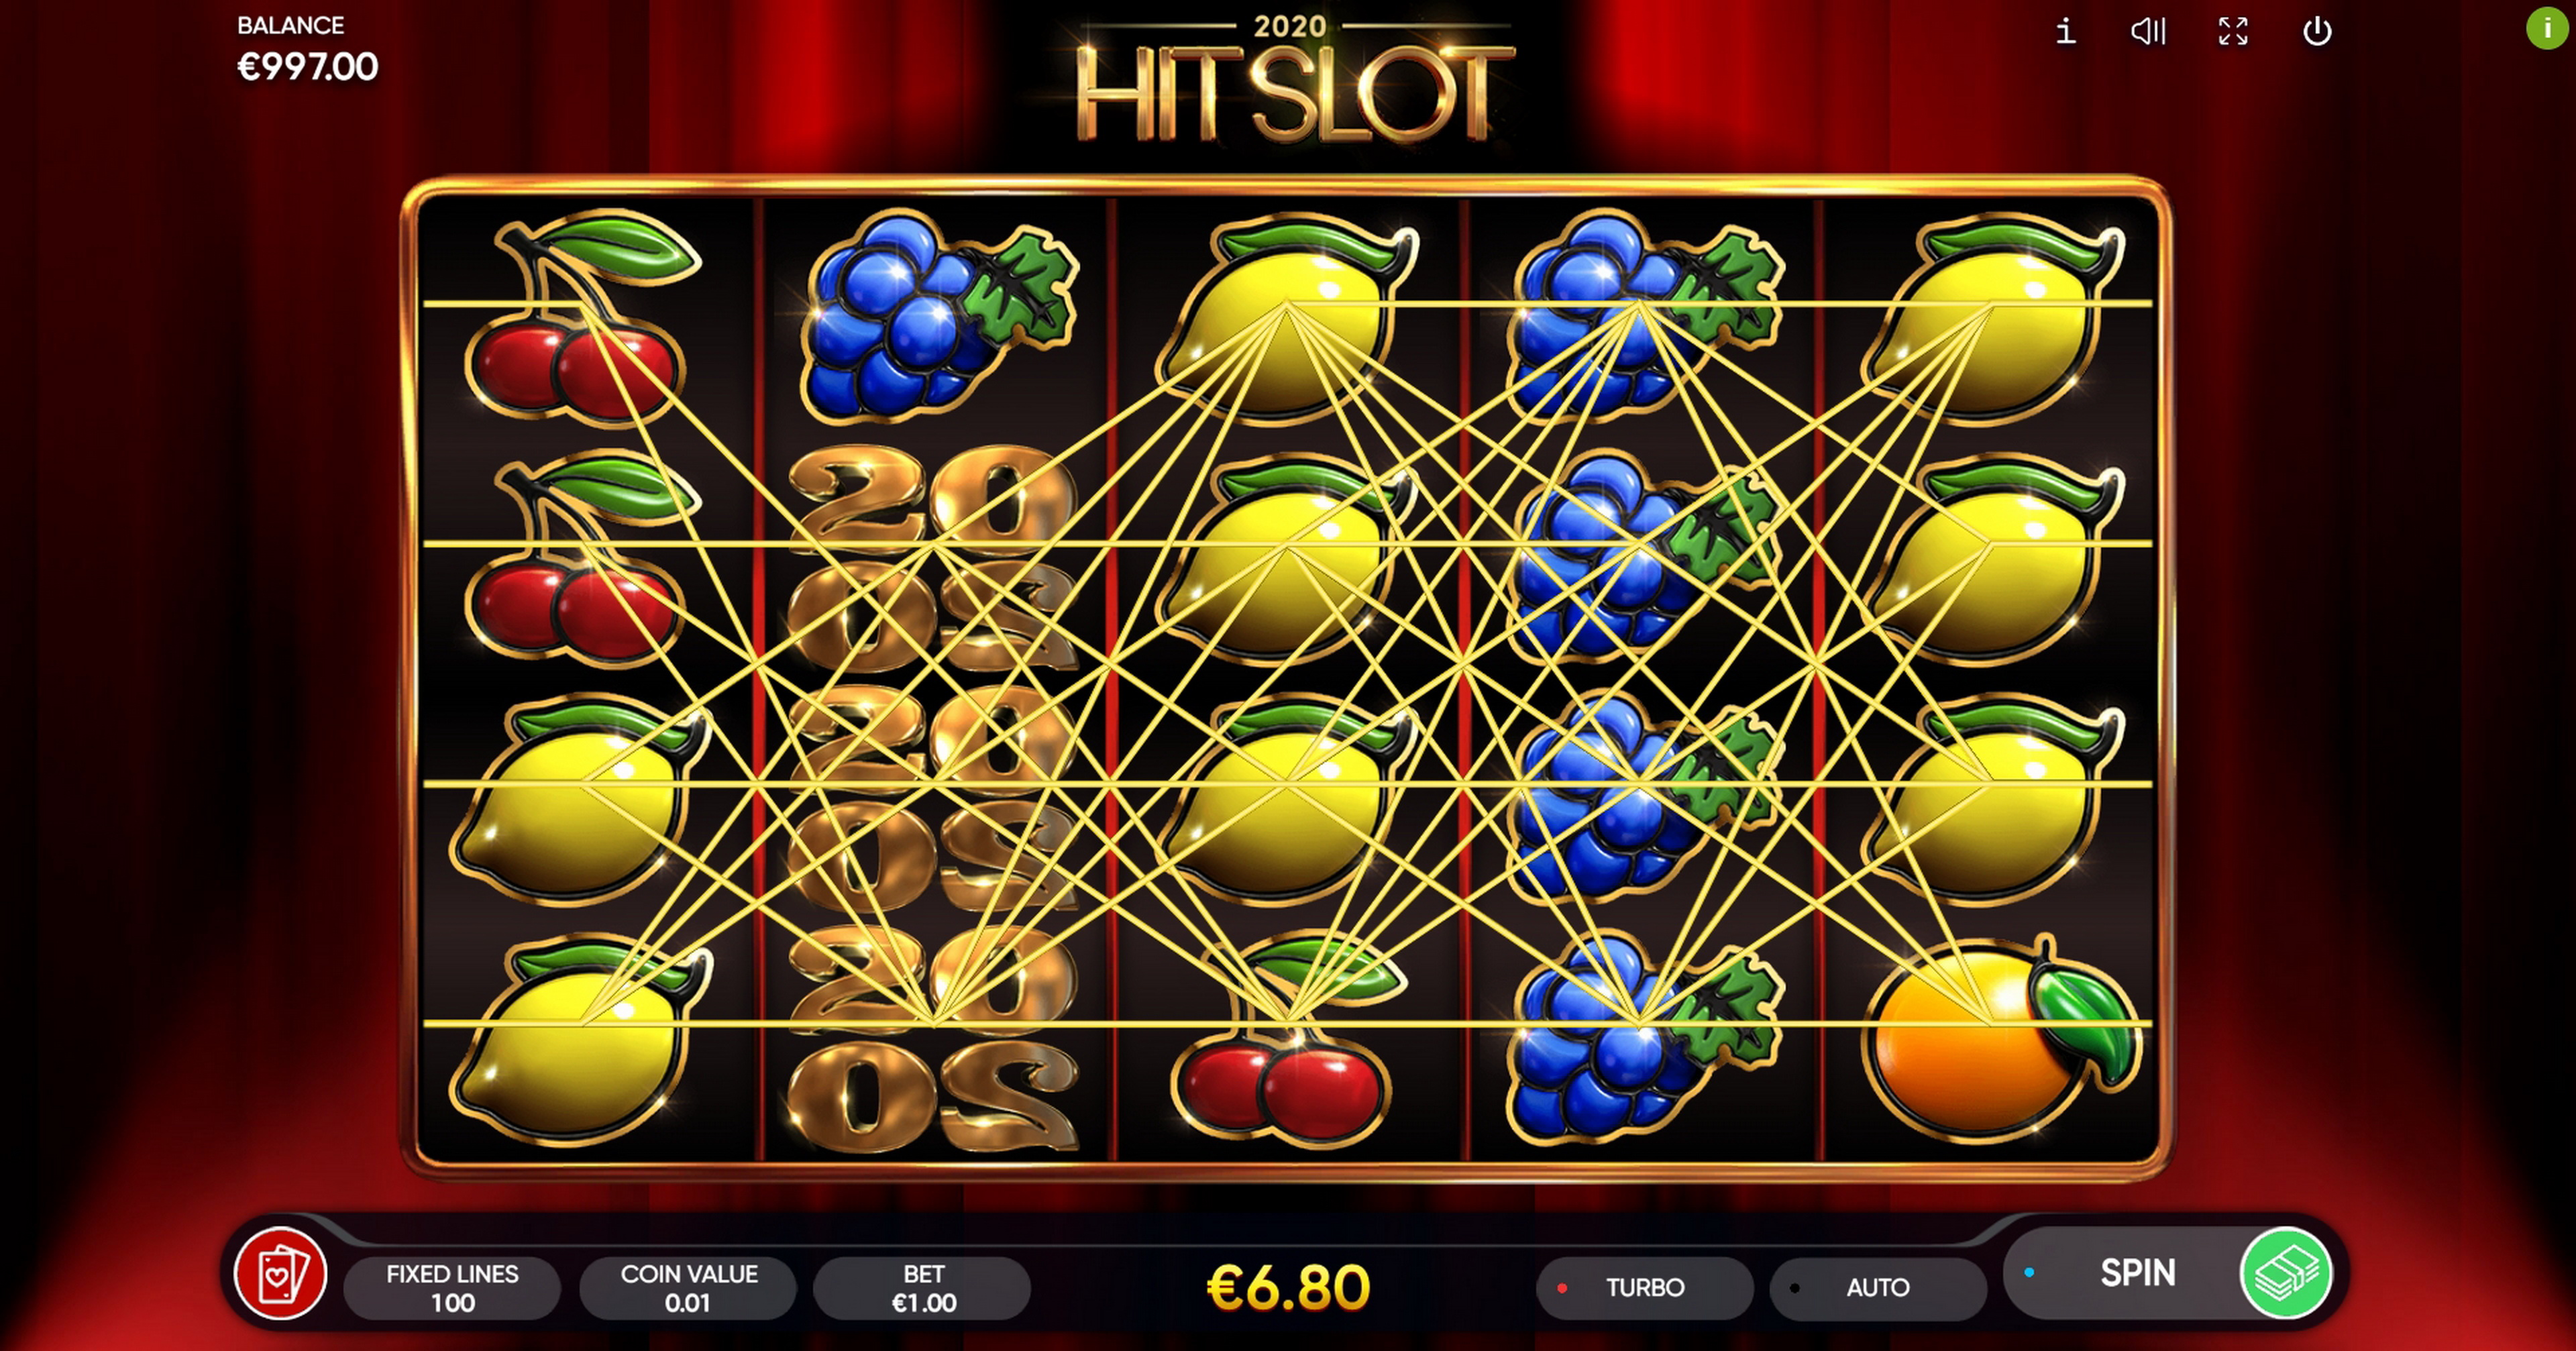 Win Money in 2020 Hit Slot Free Slot Game by Endorphina